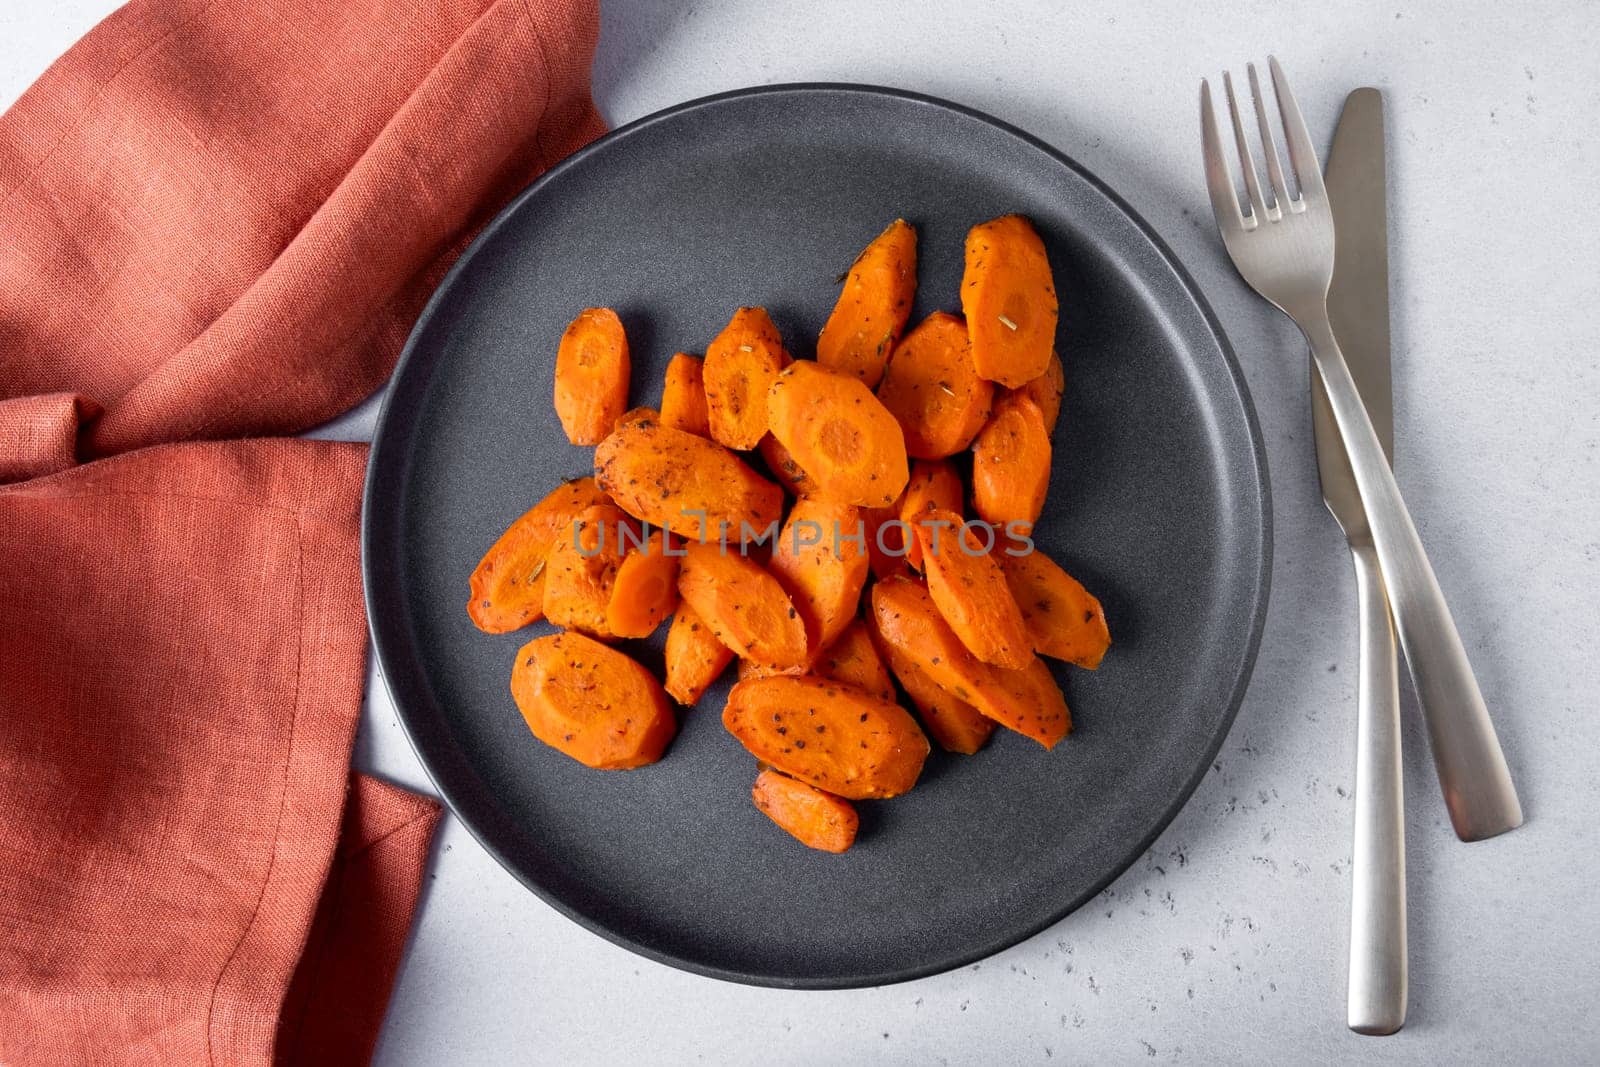 Baked carrots lie on a plate. Selective focus.